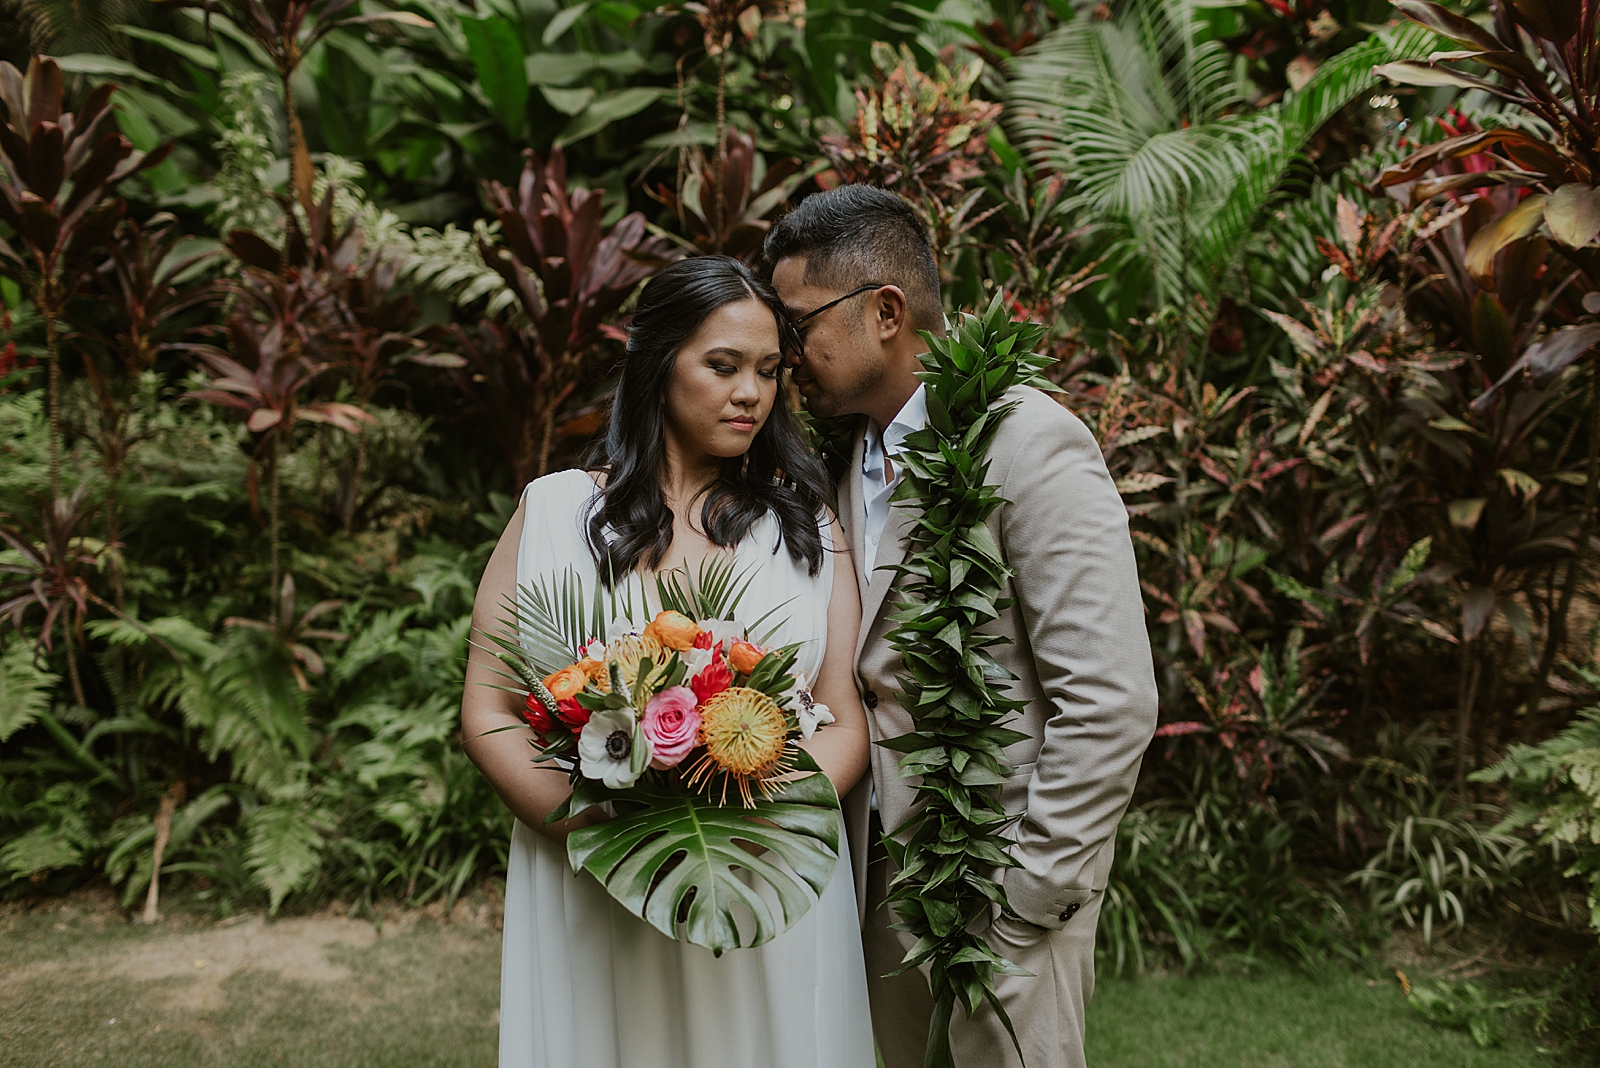 Groom nuzzling Bride with tropical greenery around them